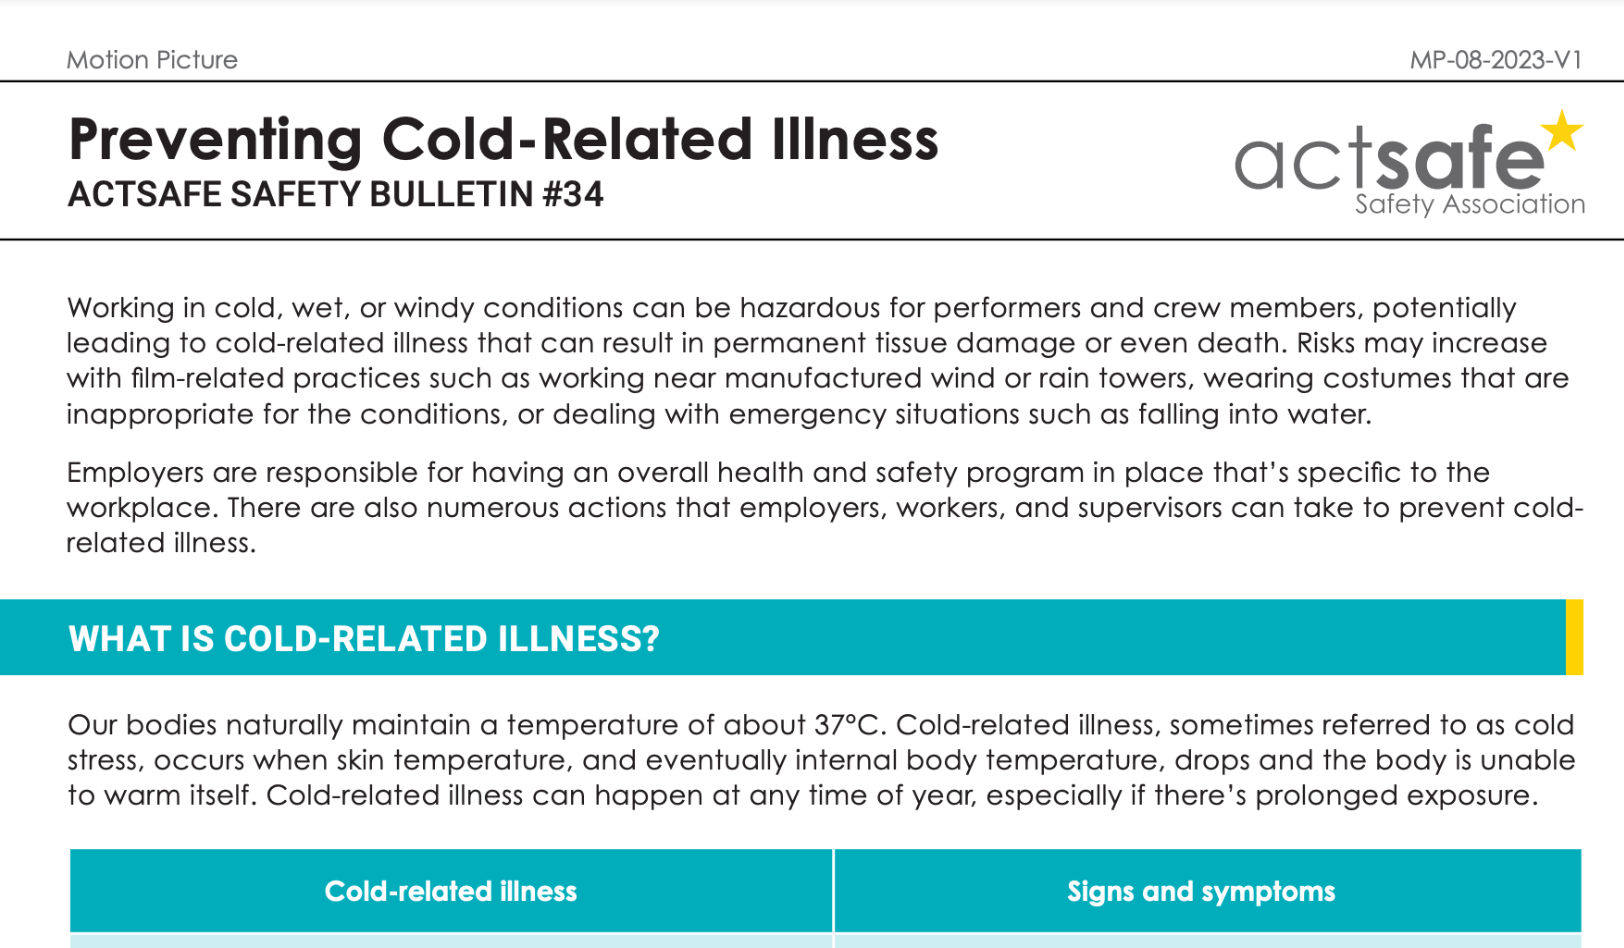 Preventing Cold-Related Illness